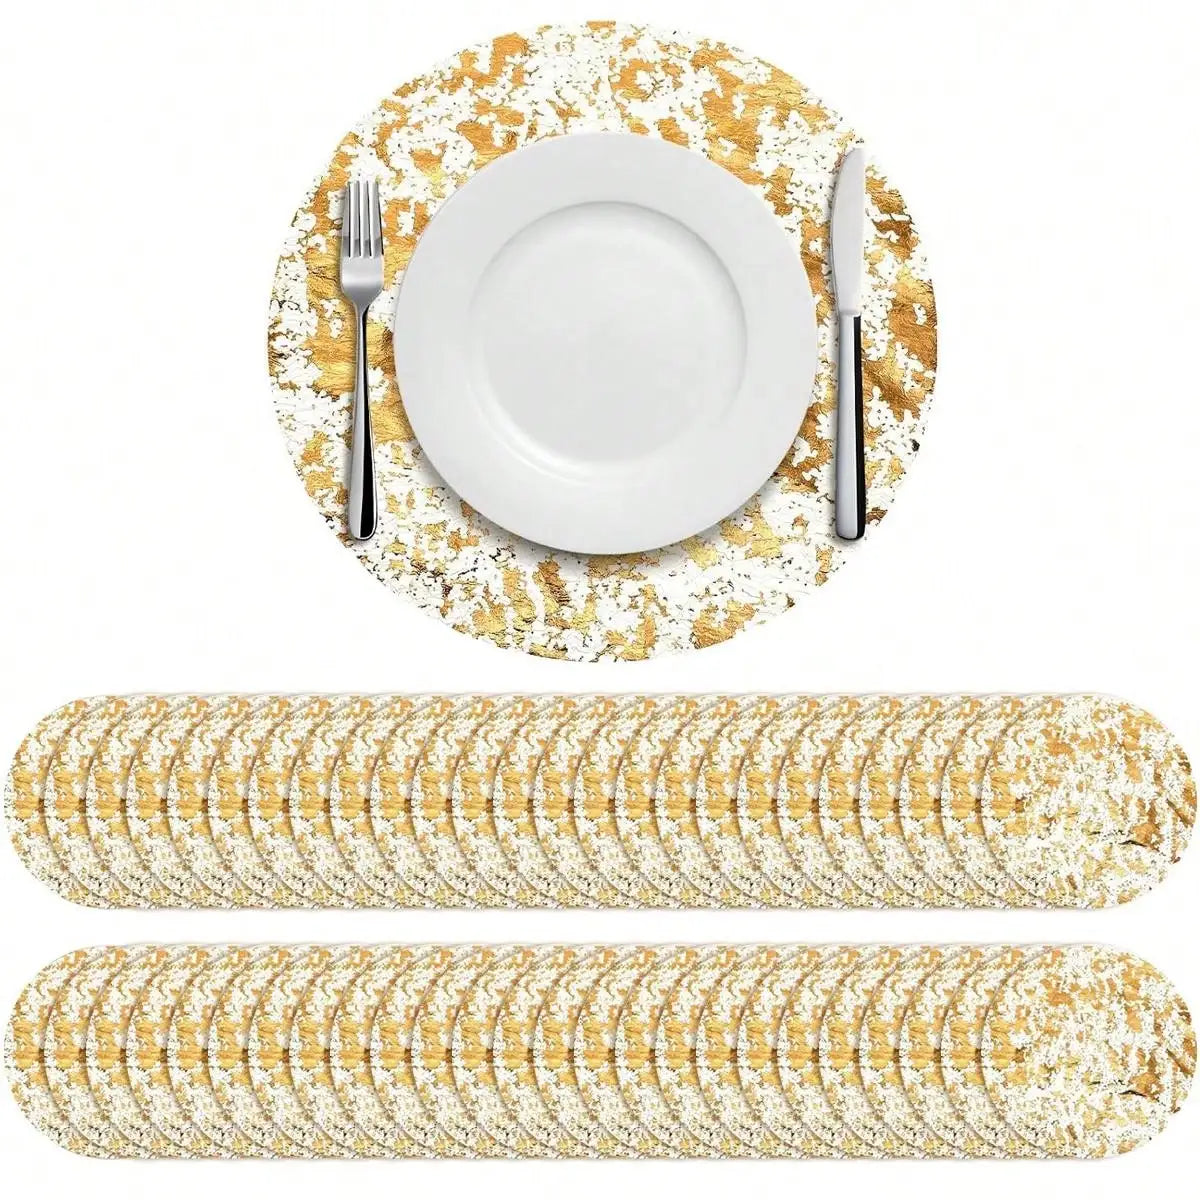 Disposable Gold Color Placemats Set Mesh Pressed Table Mats for Home Decoration